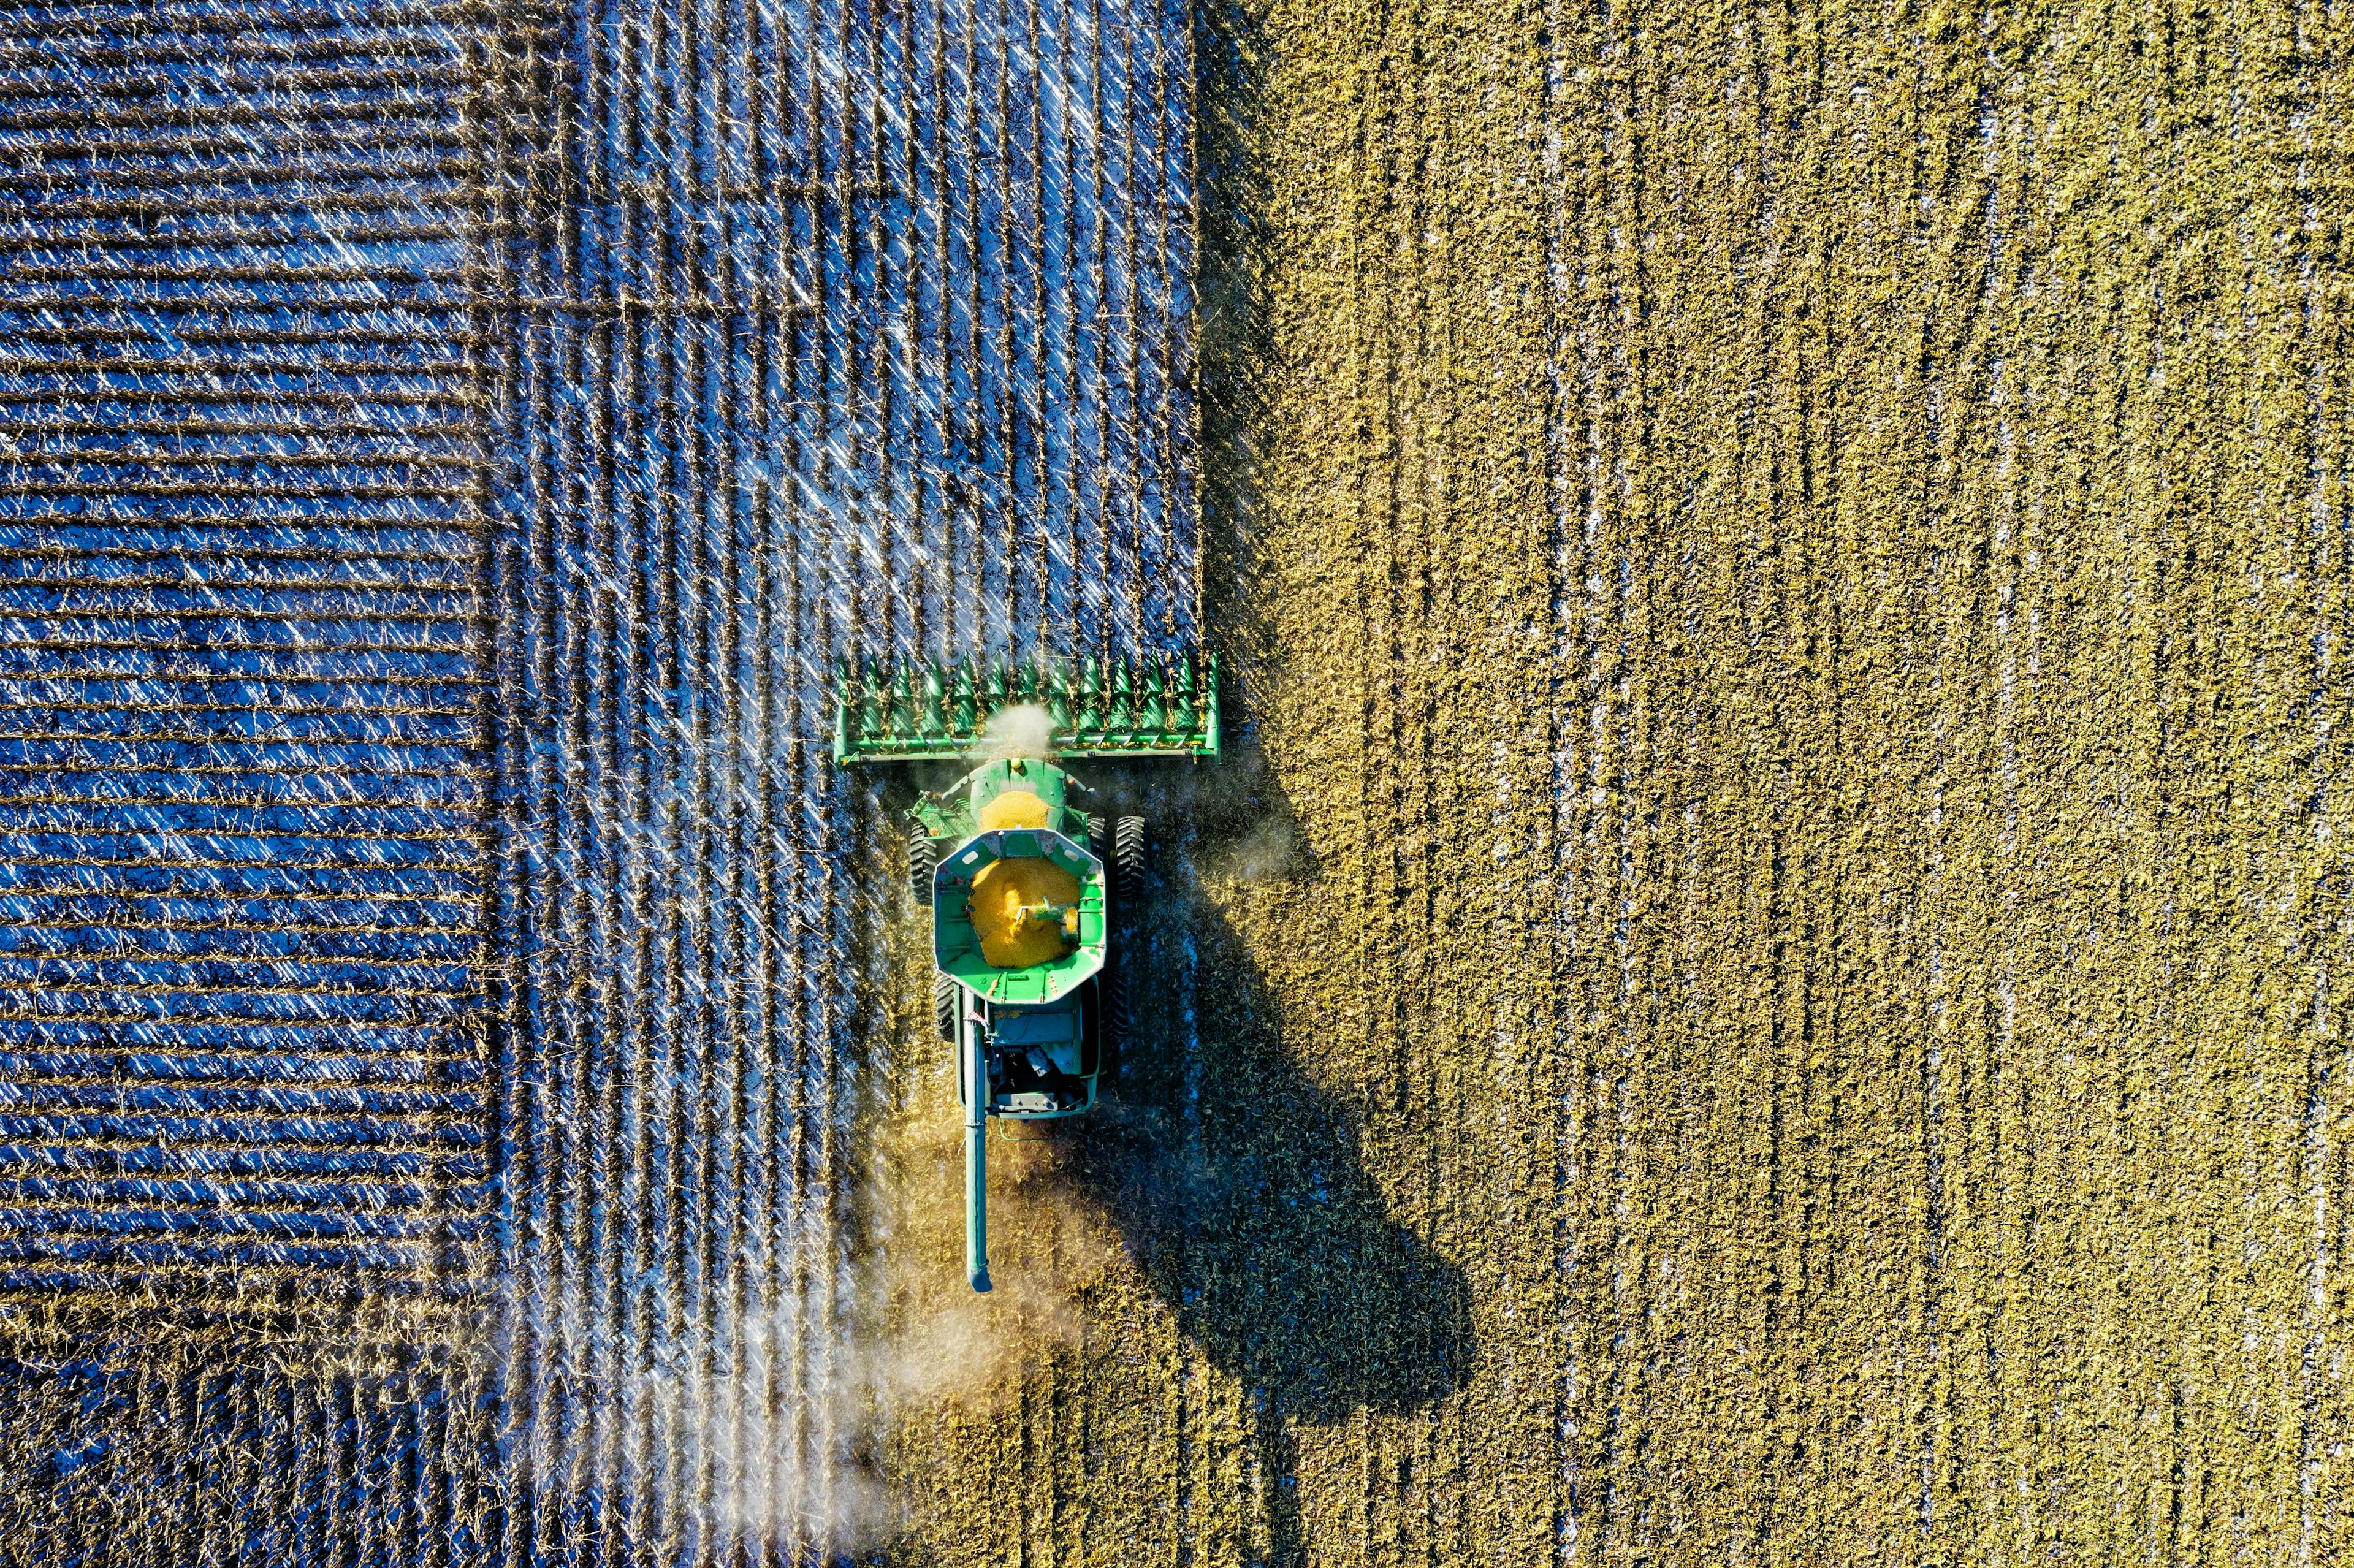 Aerial Shot of Green Milling Tractor, image by @Tom Fisk